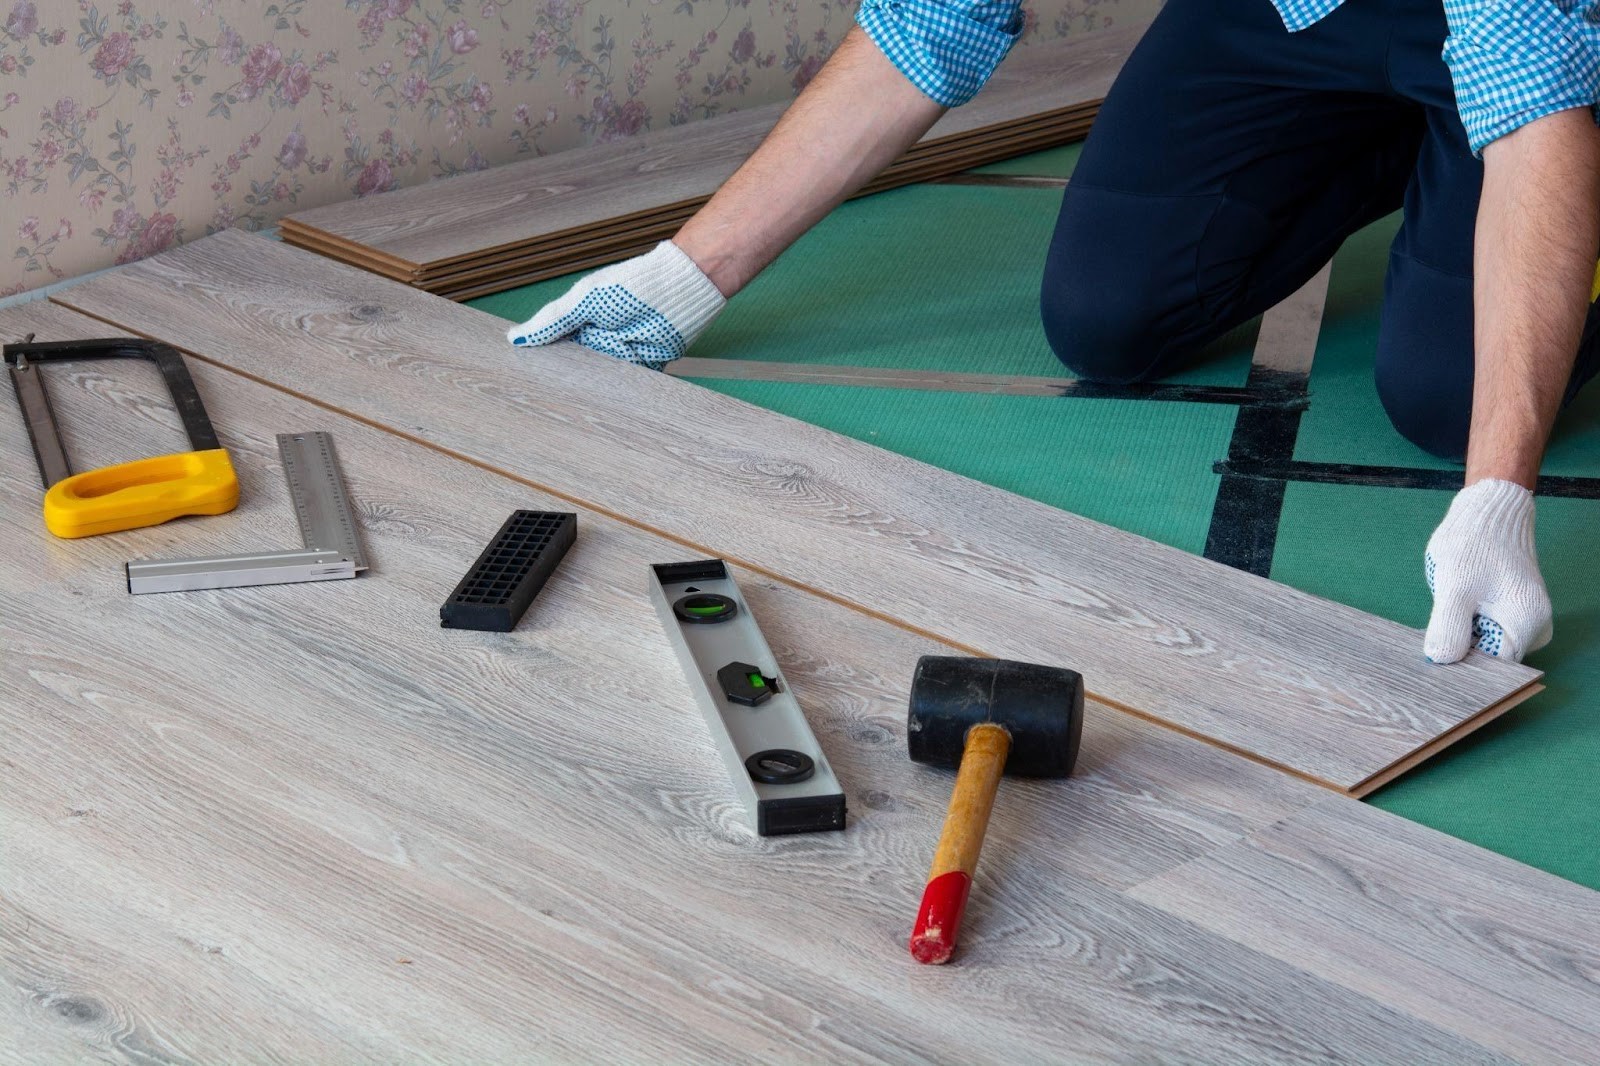 choosing durable flooring options within your budget